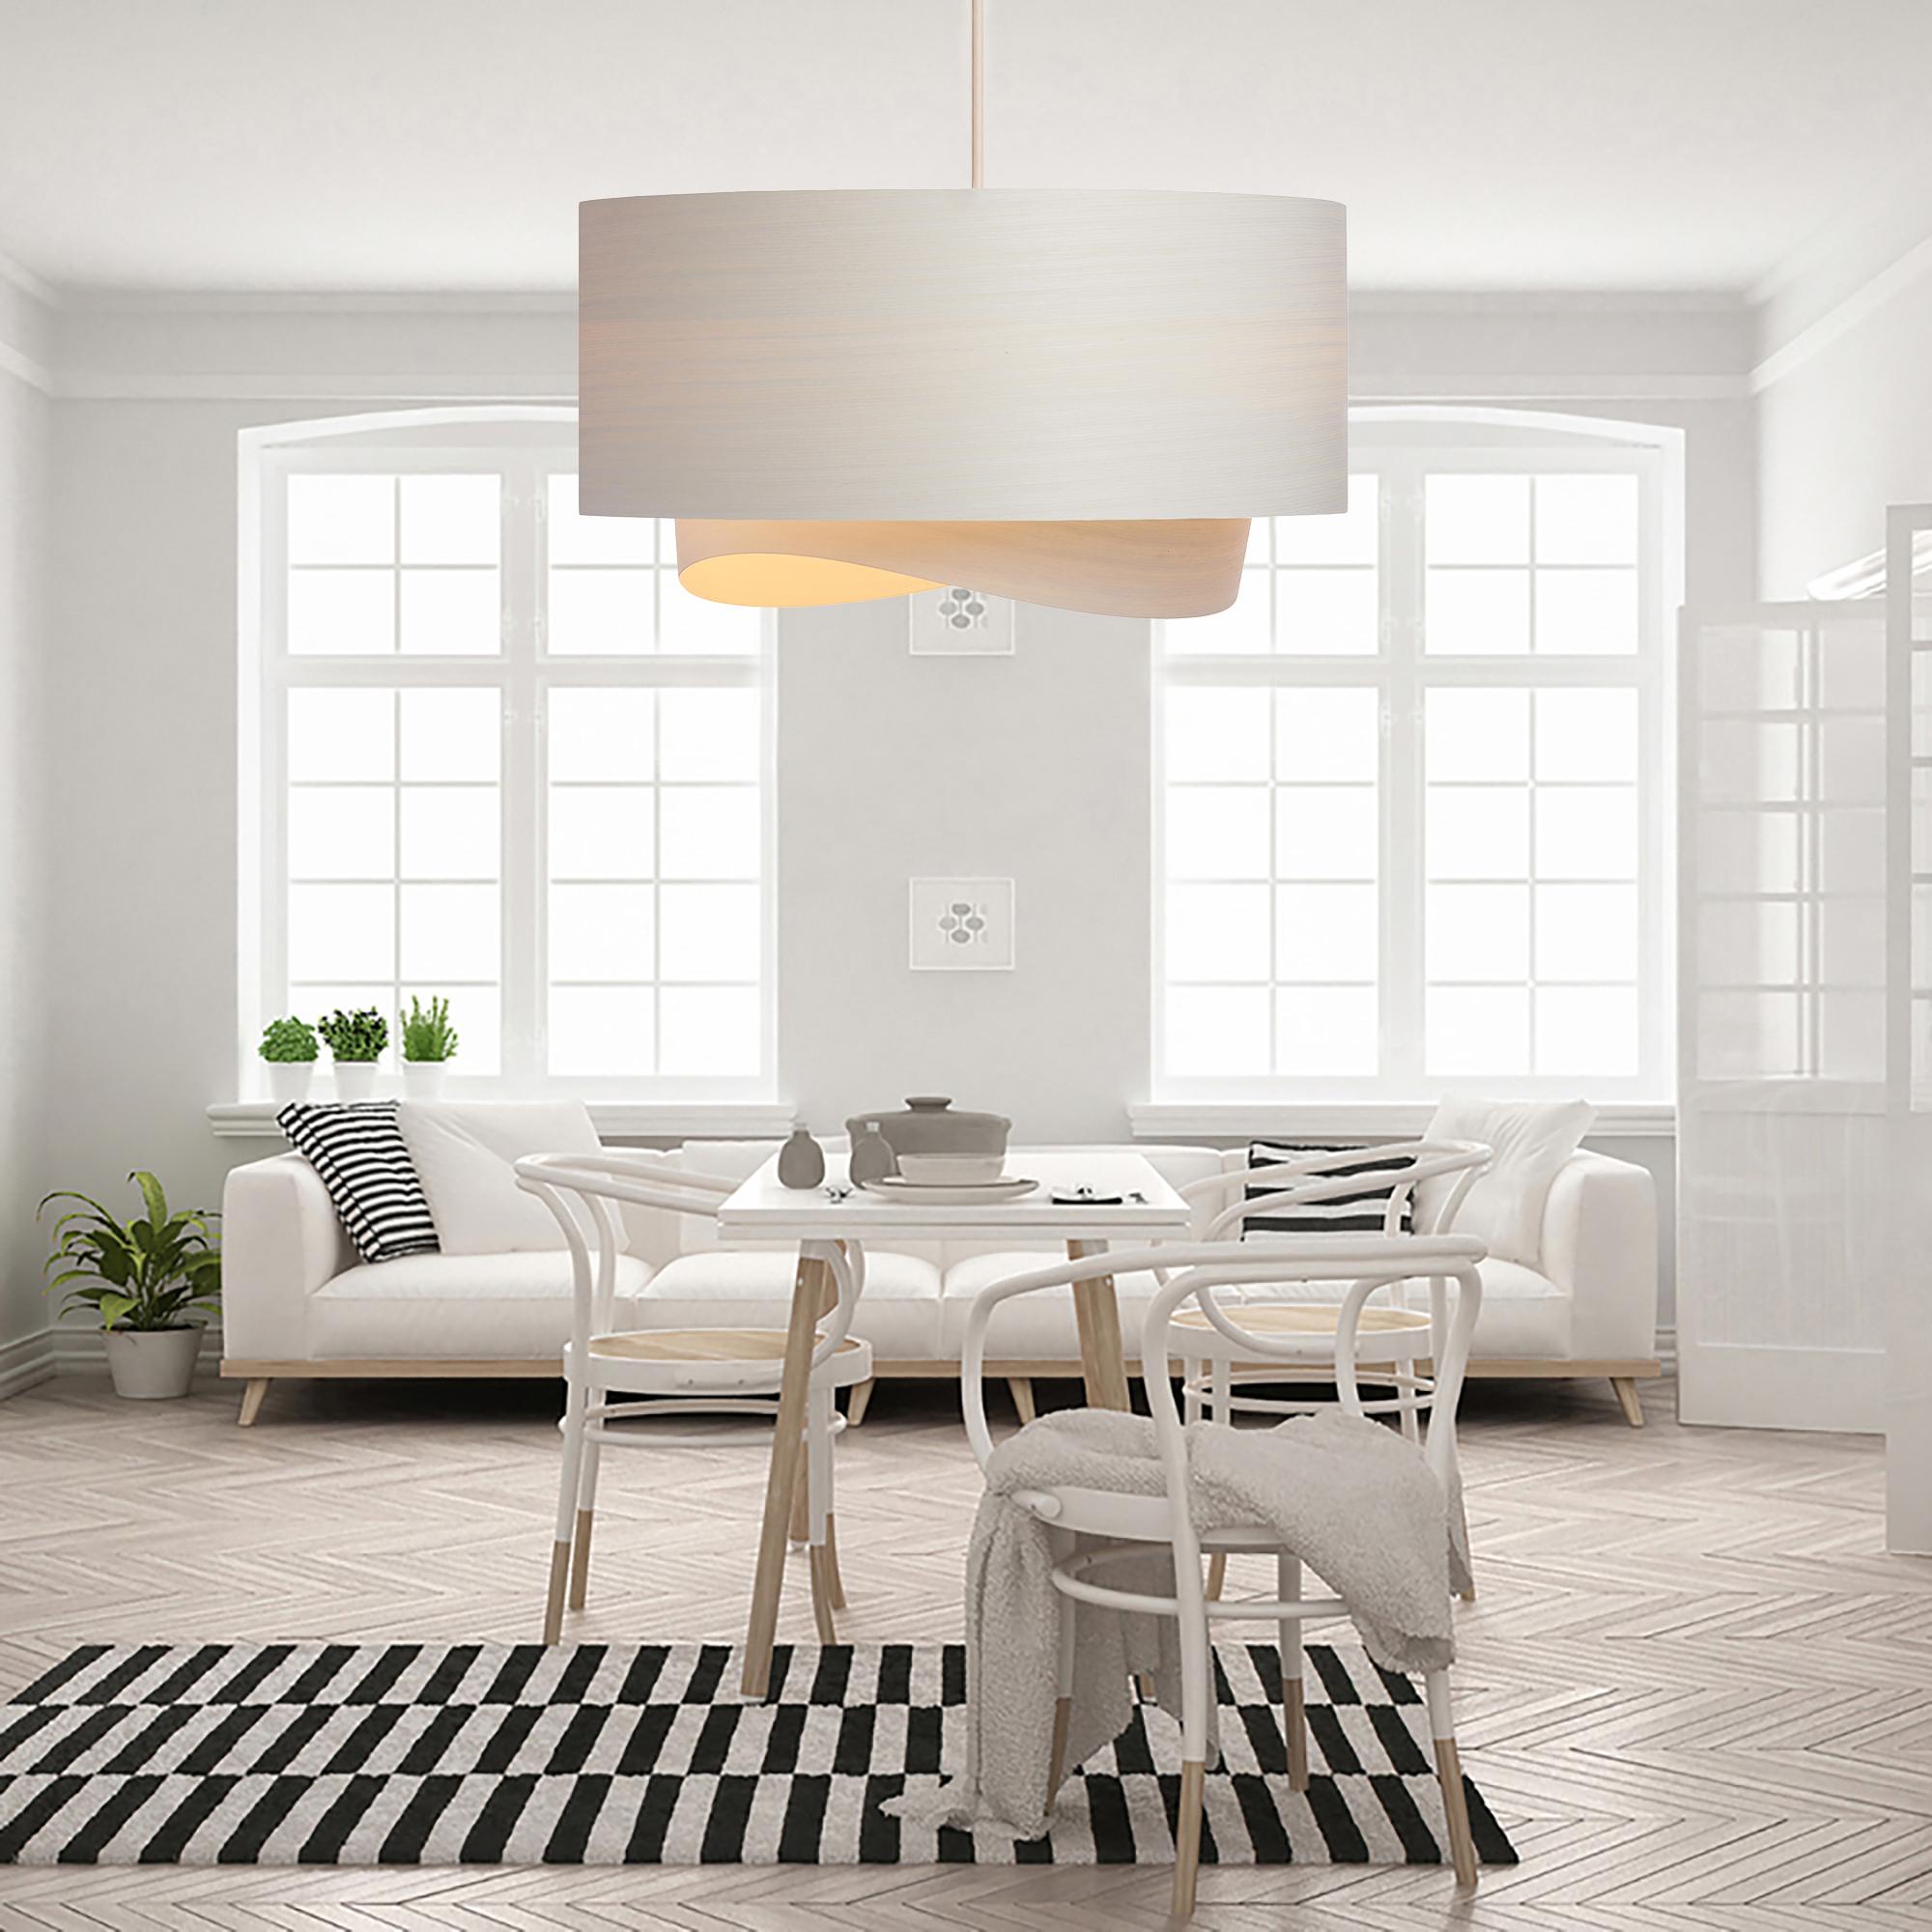 This limited-edition Half BOWEN pendant light is made with white eco wood veneer, a premium reconstituted white wood veneer created from natural wood fiber. This is a sustainable material with varied wood grain and a natural wood look and feel.